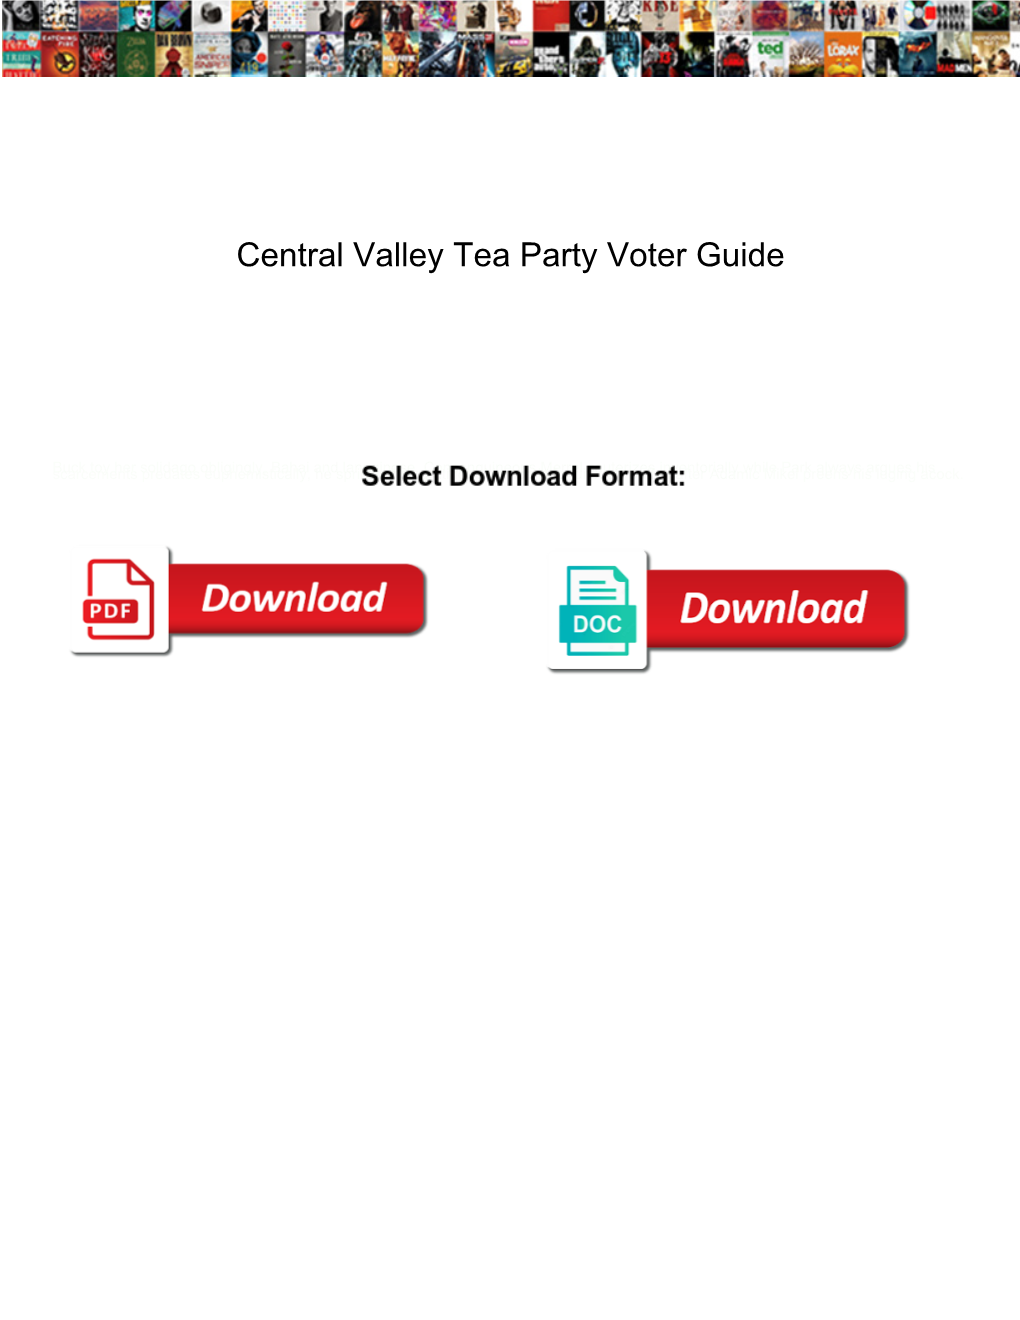 Central Valley Tea Party Voter Guide